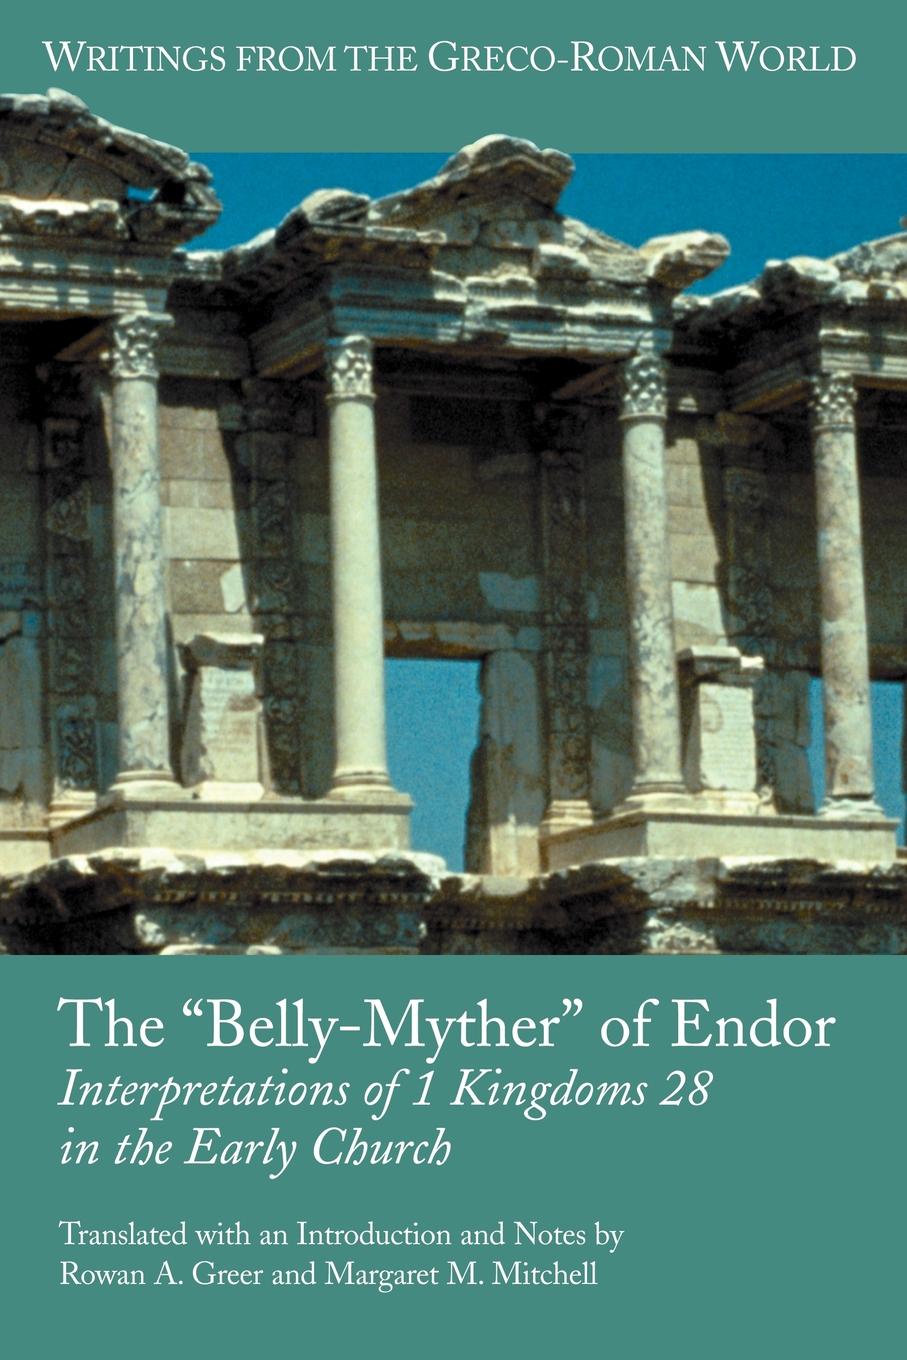 The `Belly-Myther` of Endor. Interpretations of 1 Kingdoms 28 in the Early Church